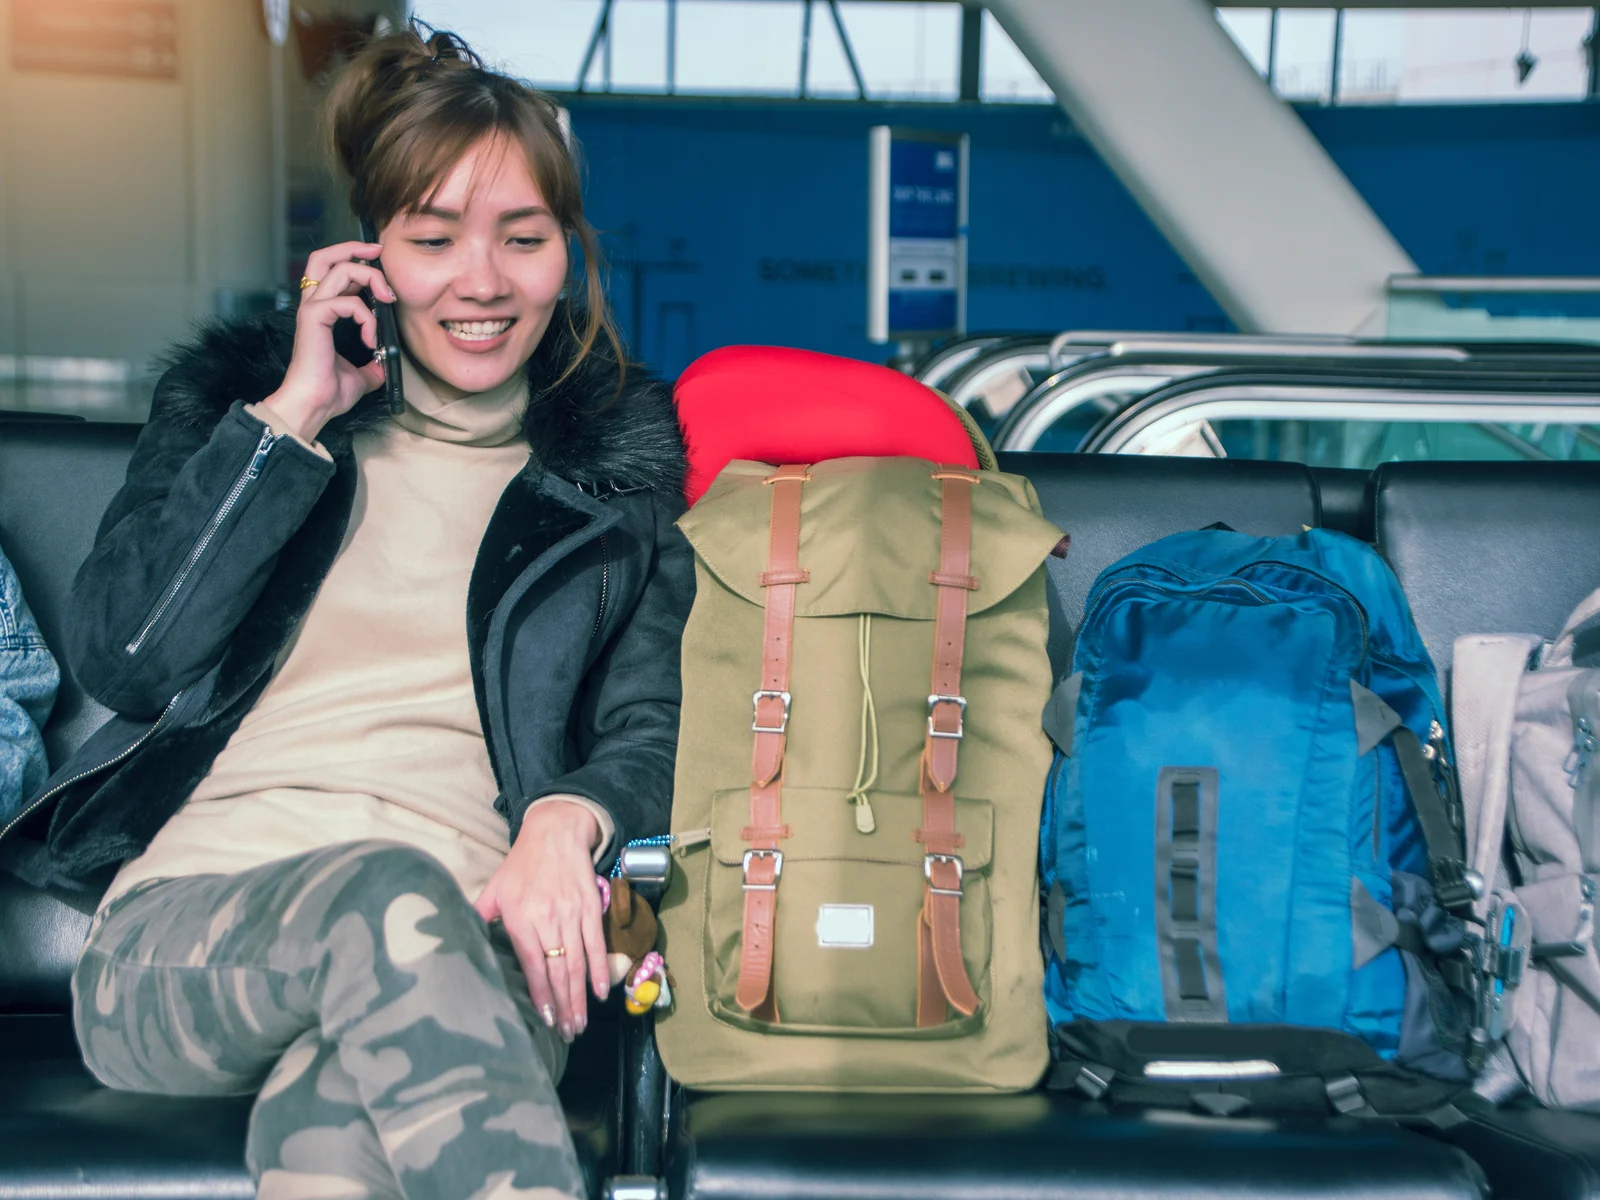 Young Asian woman sitting next to her carry-on luggage while talking on the phone in camo pants